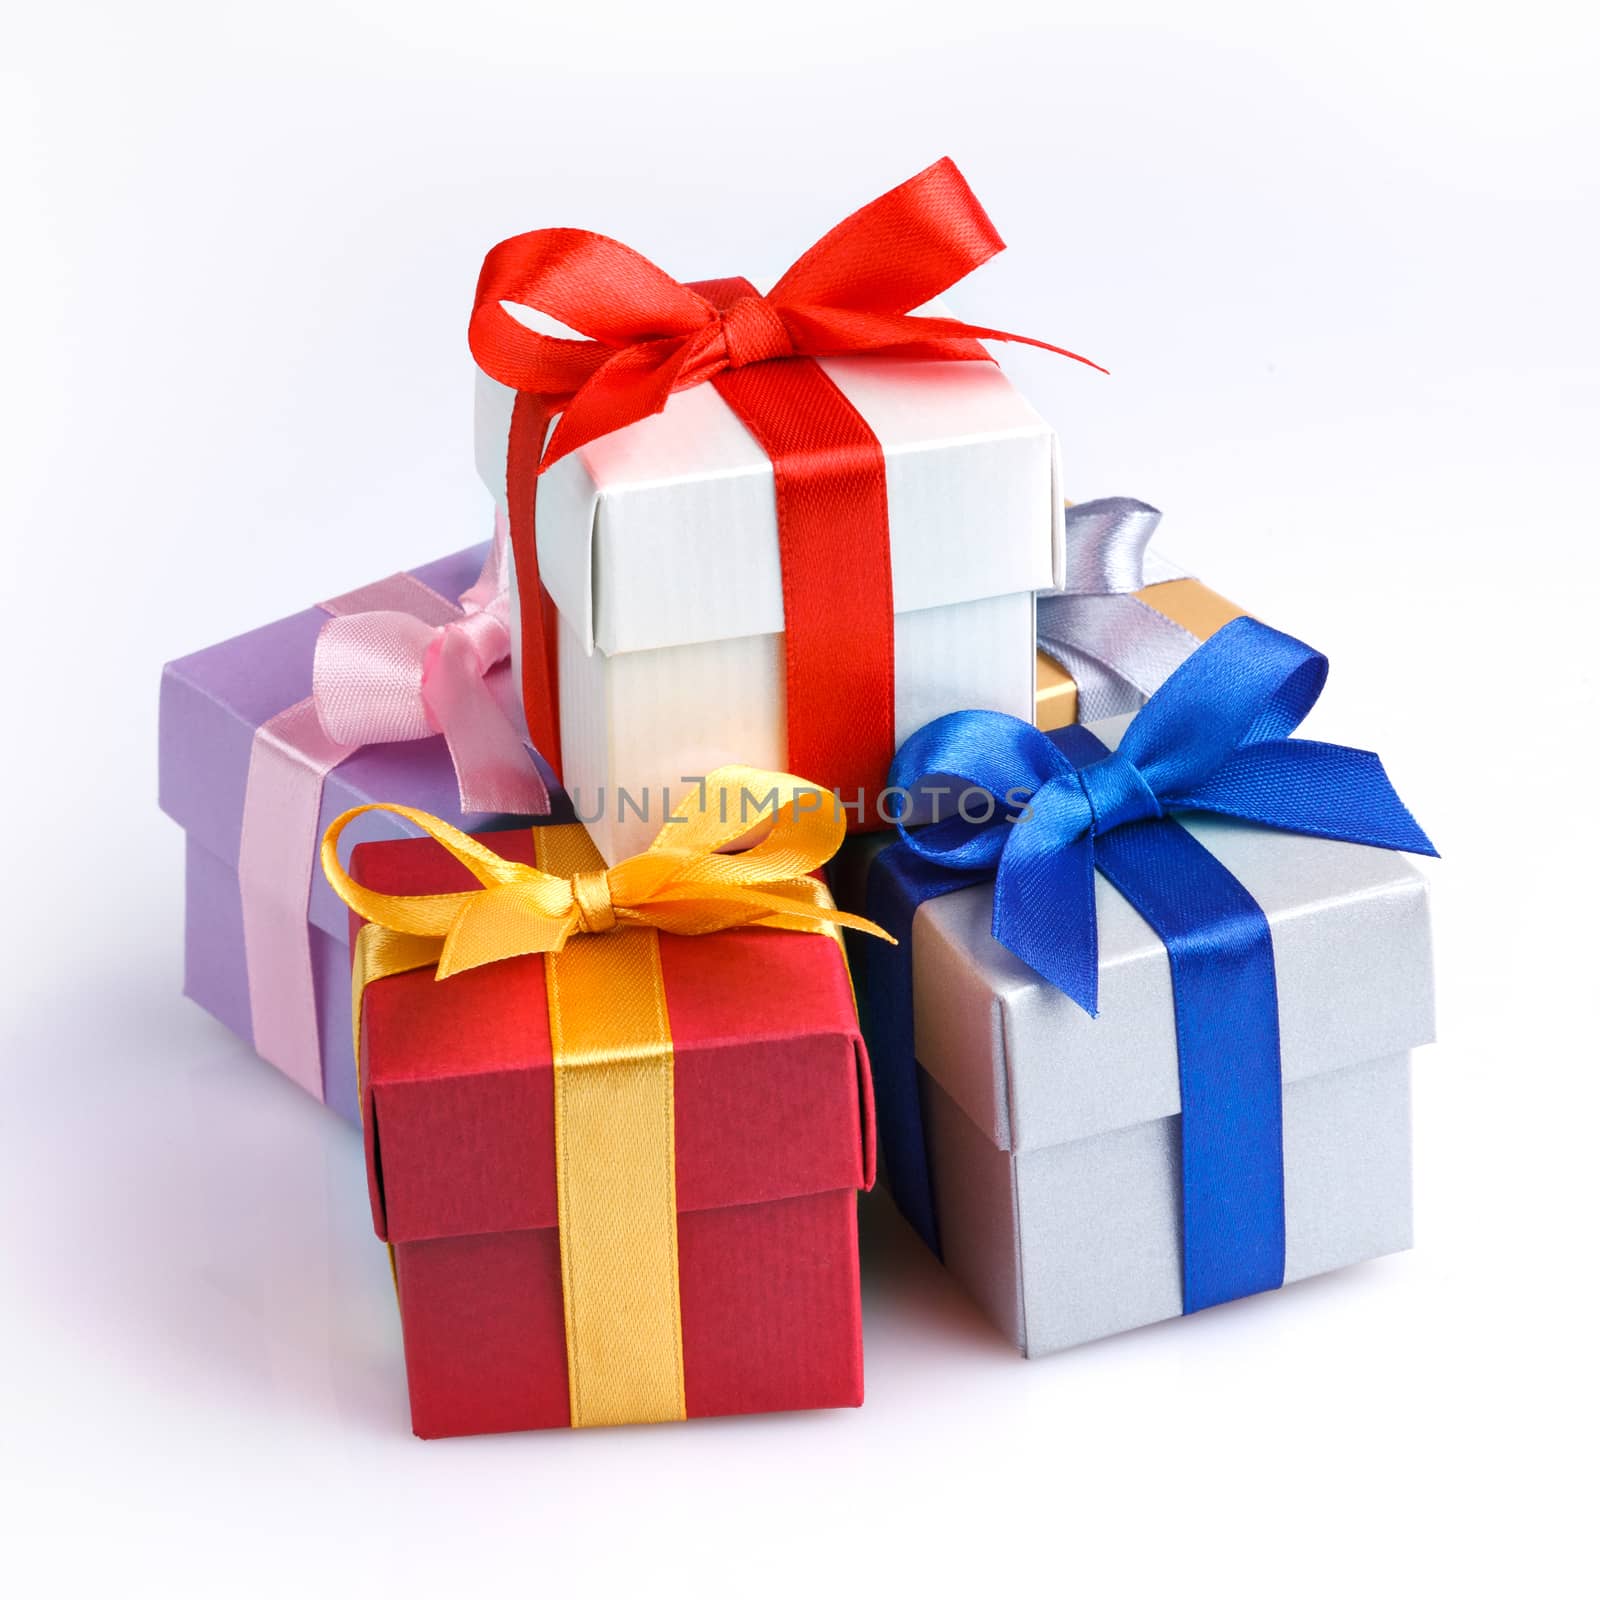 Colourful gift boxes on a white background